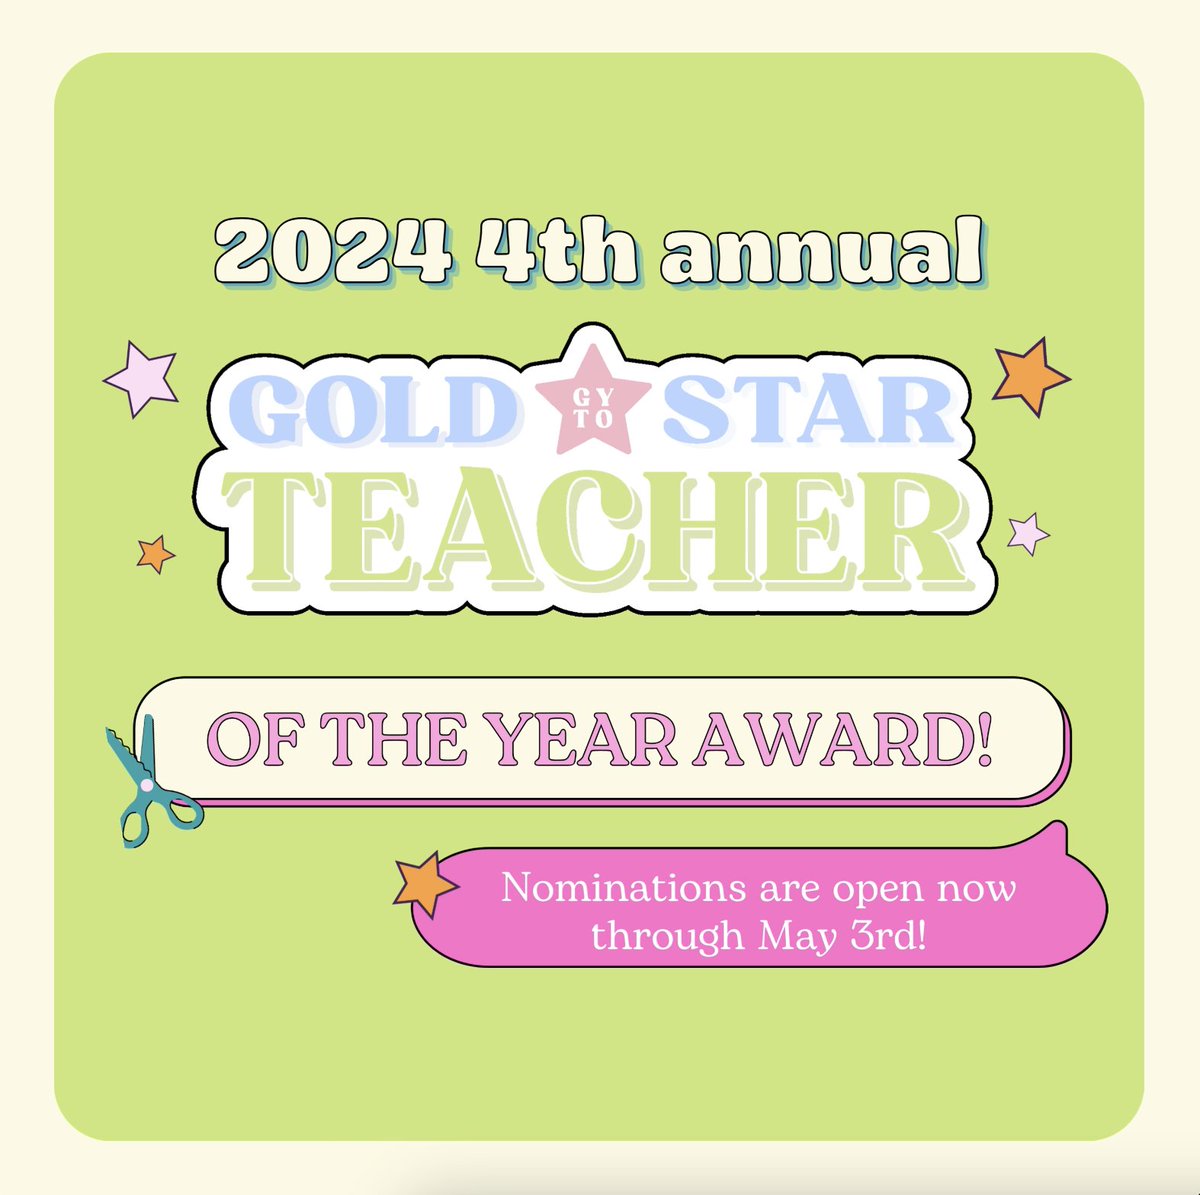 Nominate an educator who has gone above and beyond for their students, in their community, or for their colleagues! Nominate an educator here: getyourteachon.com/goldstar! #getyourteachon #GYTOGoldStarTeacher #teacheroftheyear #GoldStarTeacher #iteach #teachershare